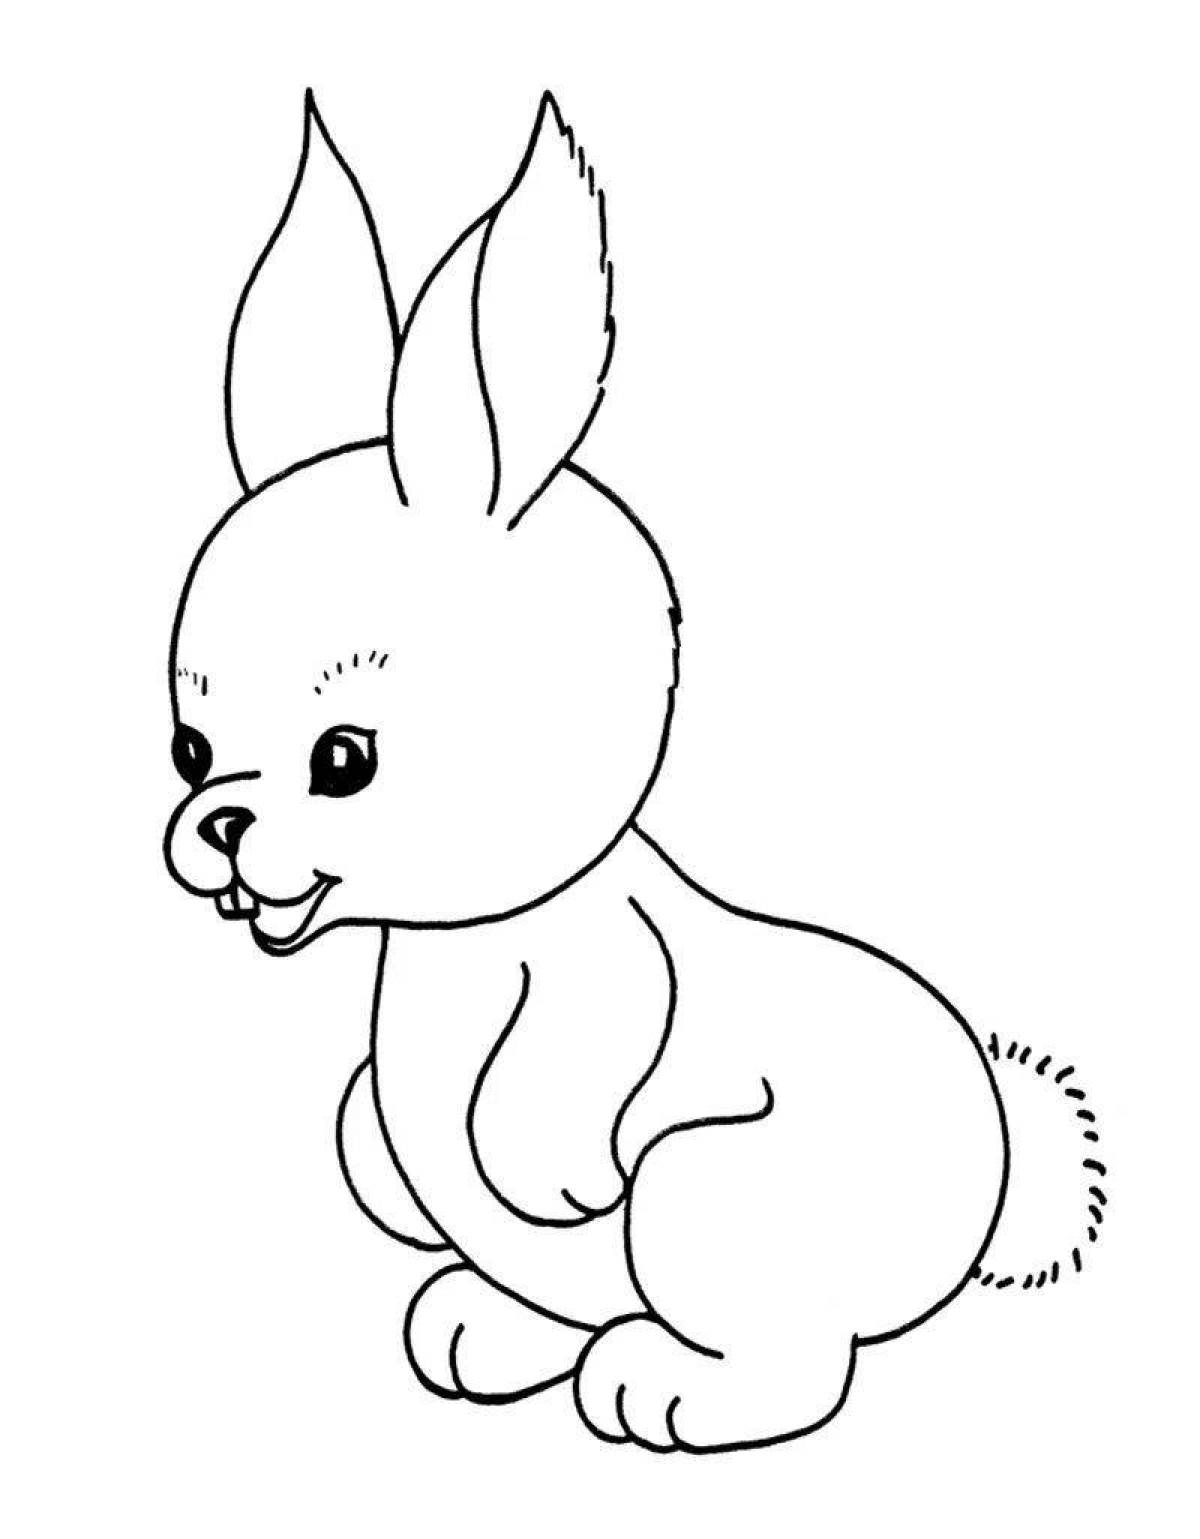 Coloring page magical rabbit and cat